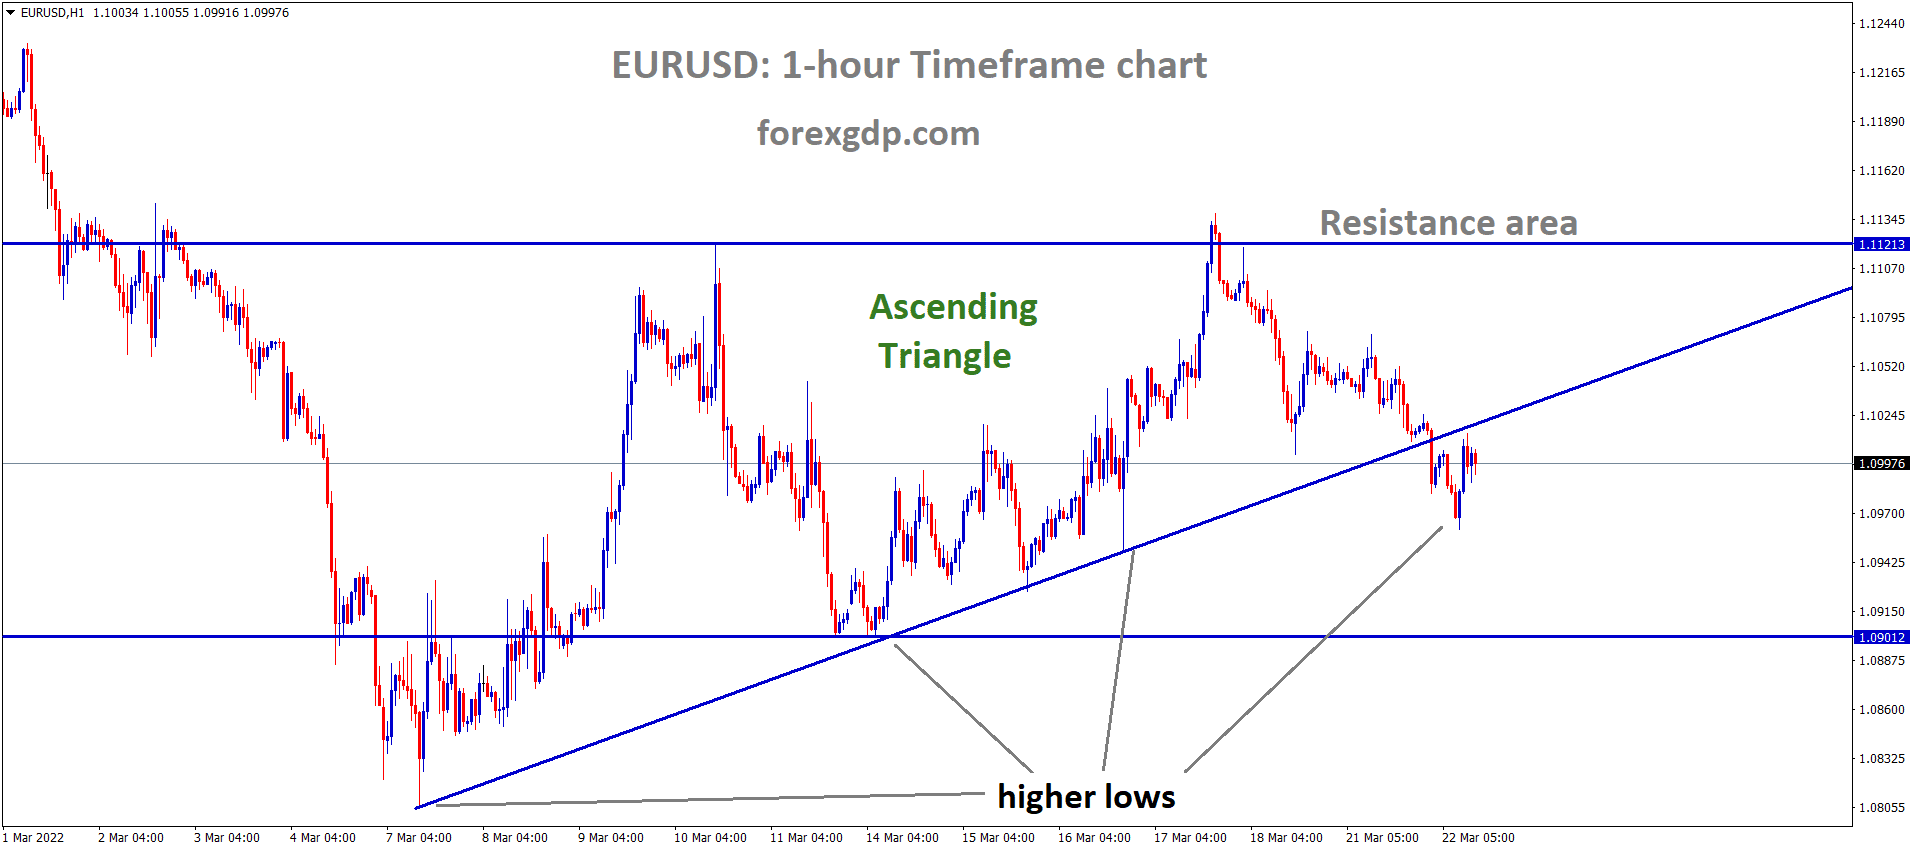 EURUSD H1 Market has reached the higher low area of the Ascending triangle pattern.